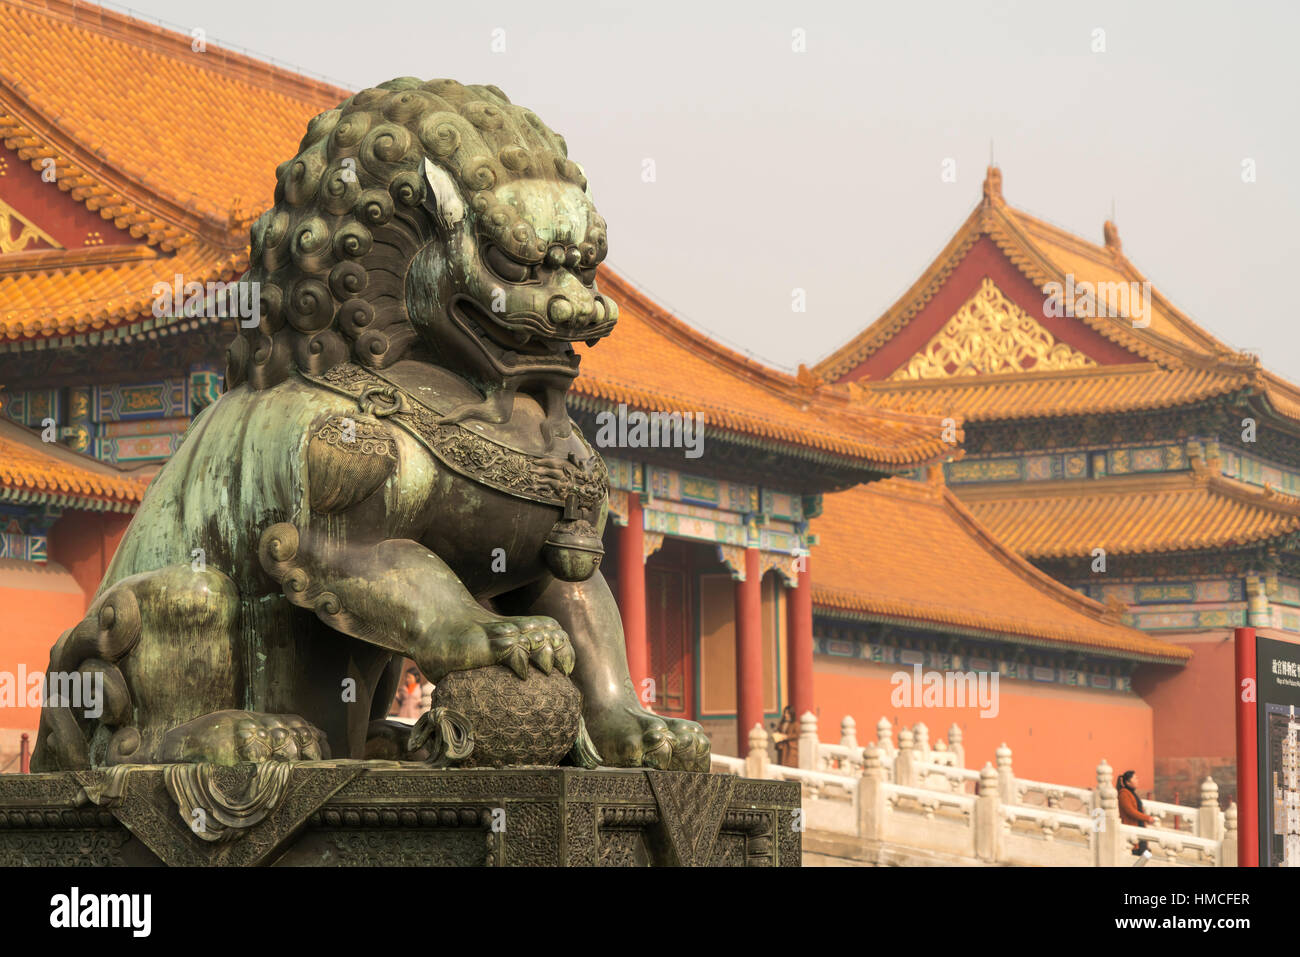 bronze lions guarding the Gates of the Forbidden City, Beijing, People's Republic of China, Asia Stock Photo